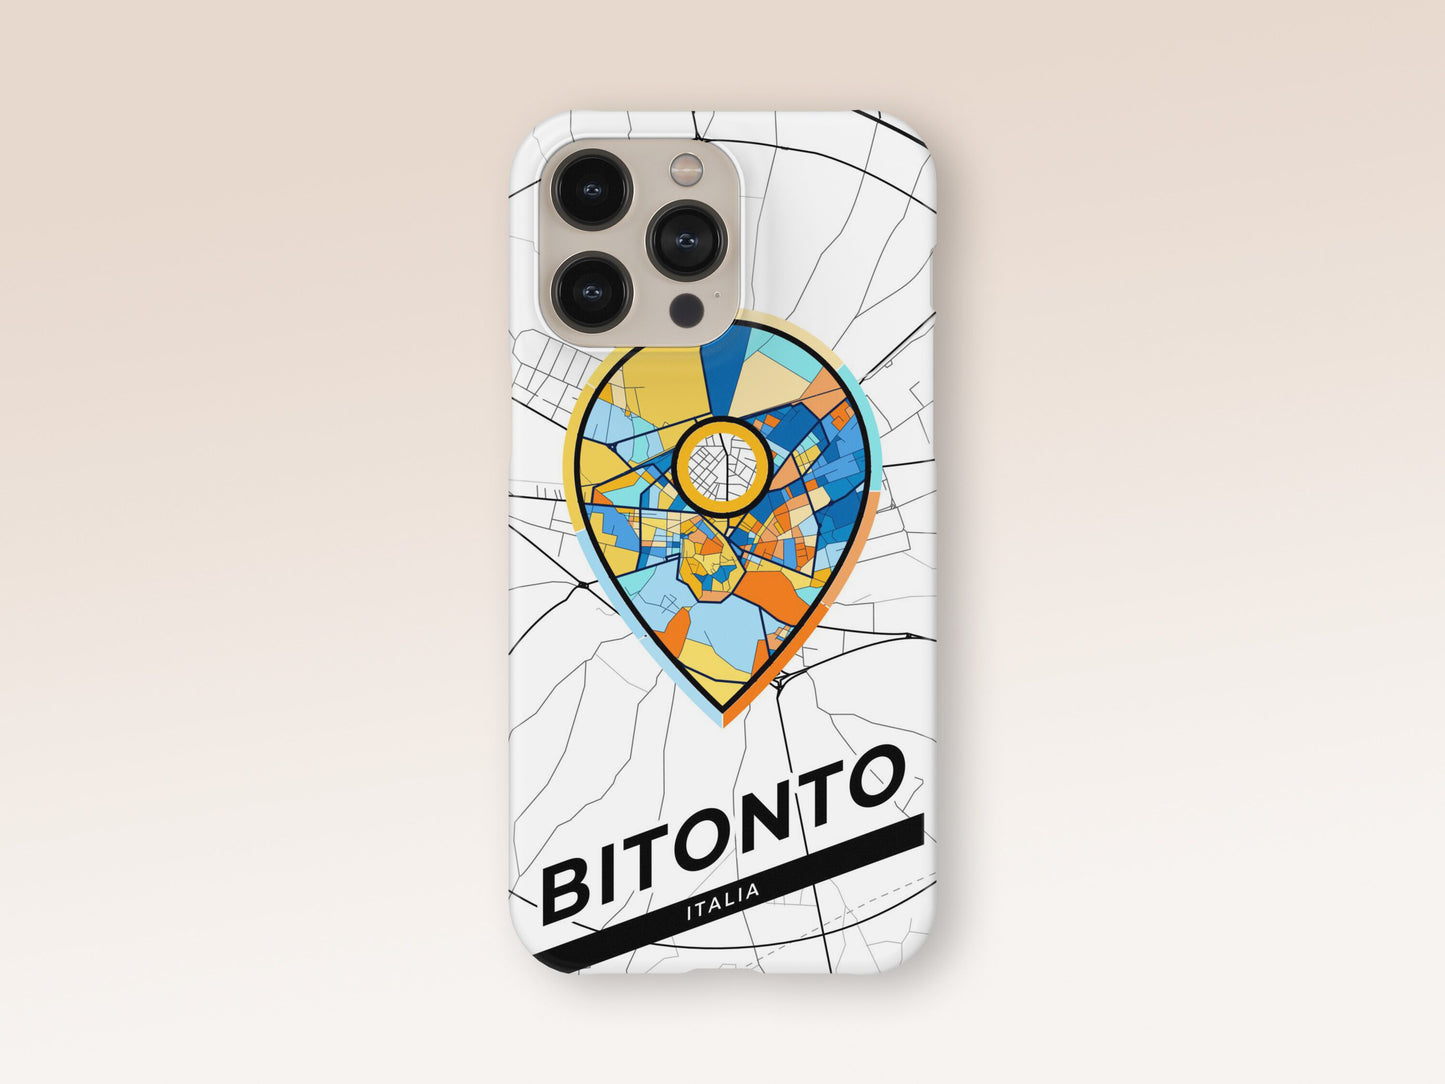 Bitonto Italy slim phone case with colorful icon. Birthday, wedding or housewarming gift. Couple match cases. 1